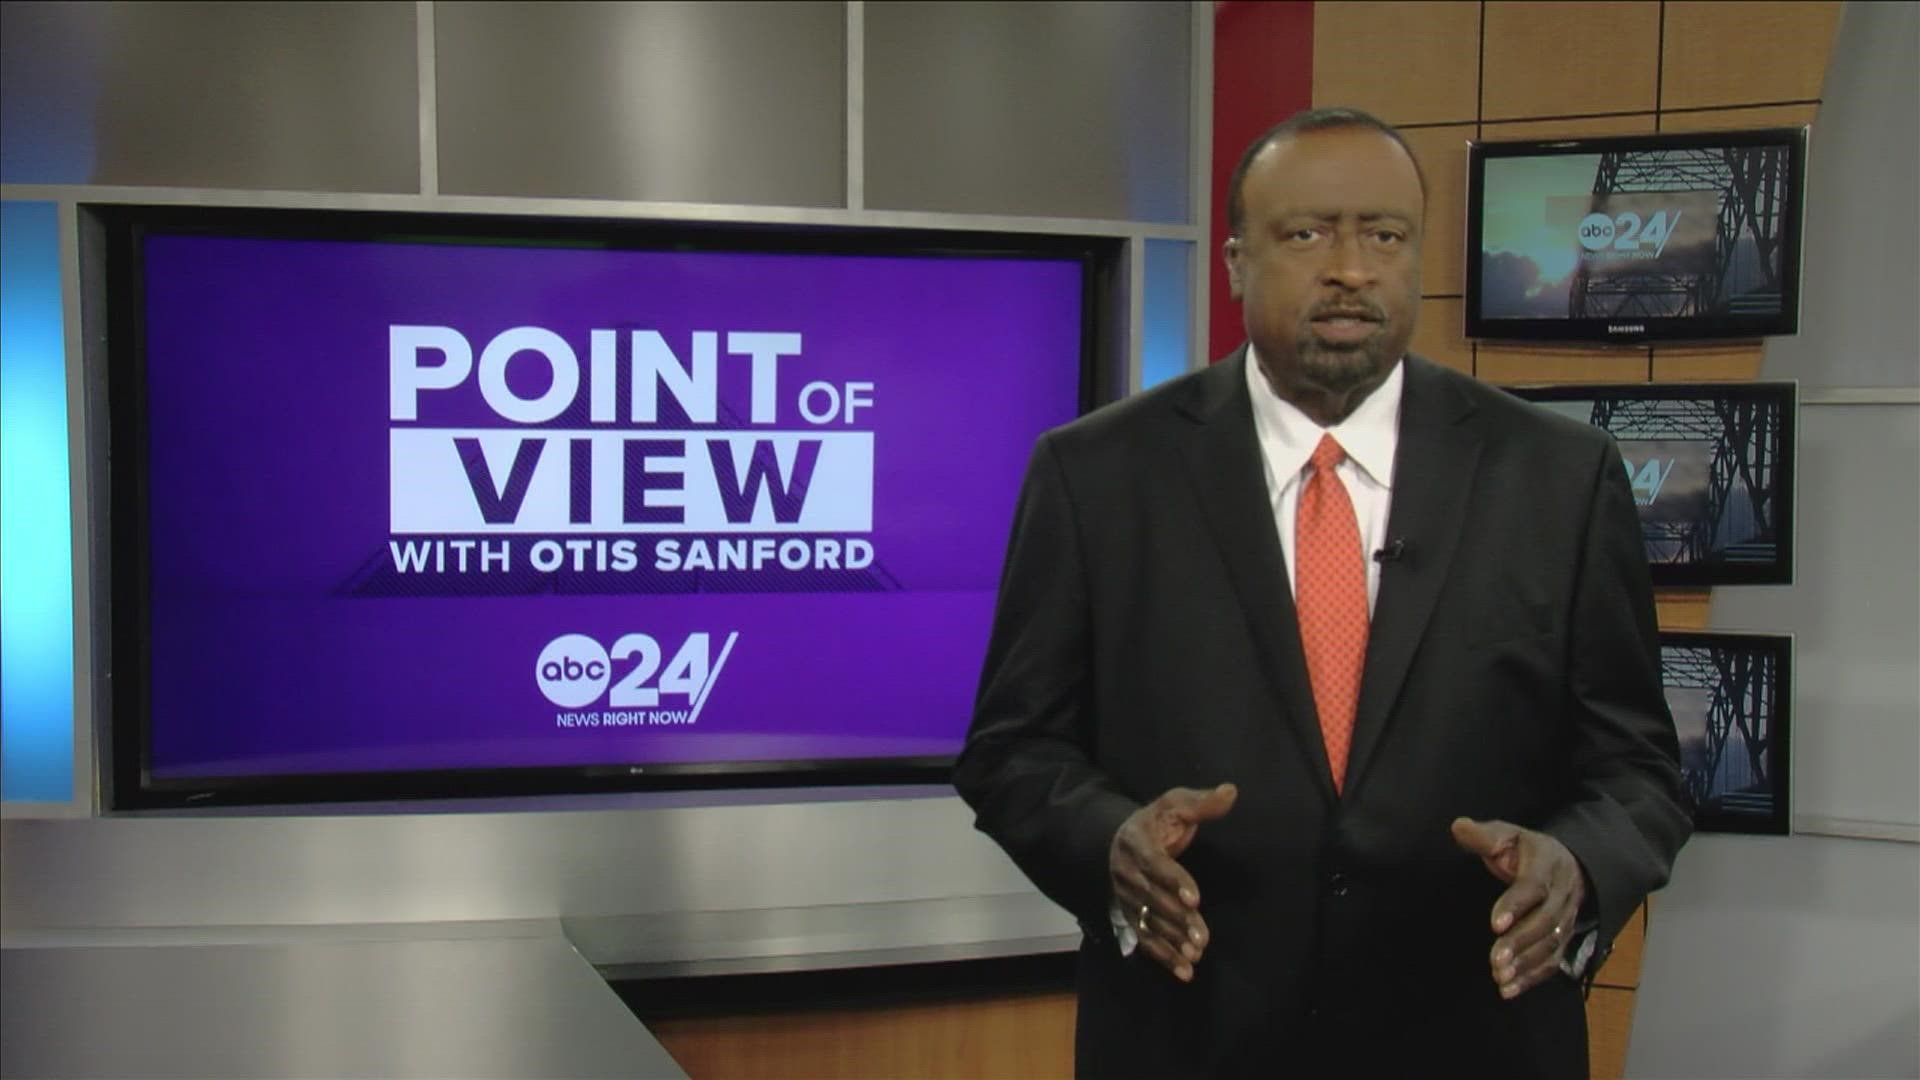 ABC24 political analyst and commentator Otis Sanford shared his point of view on the latest on the financial troubles in Mason, Tennessee.